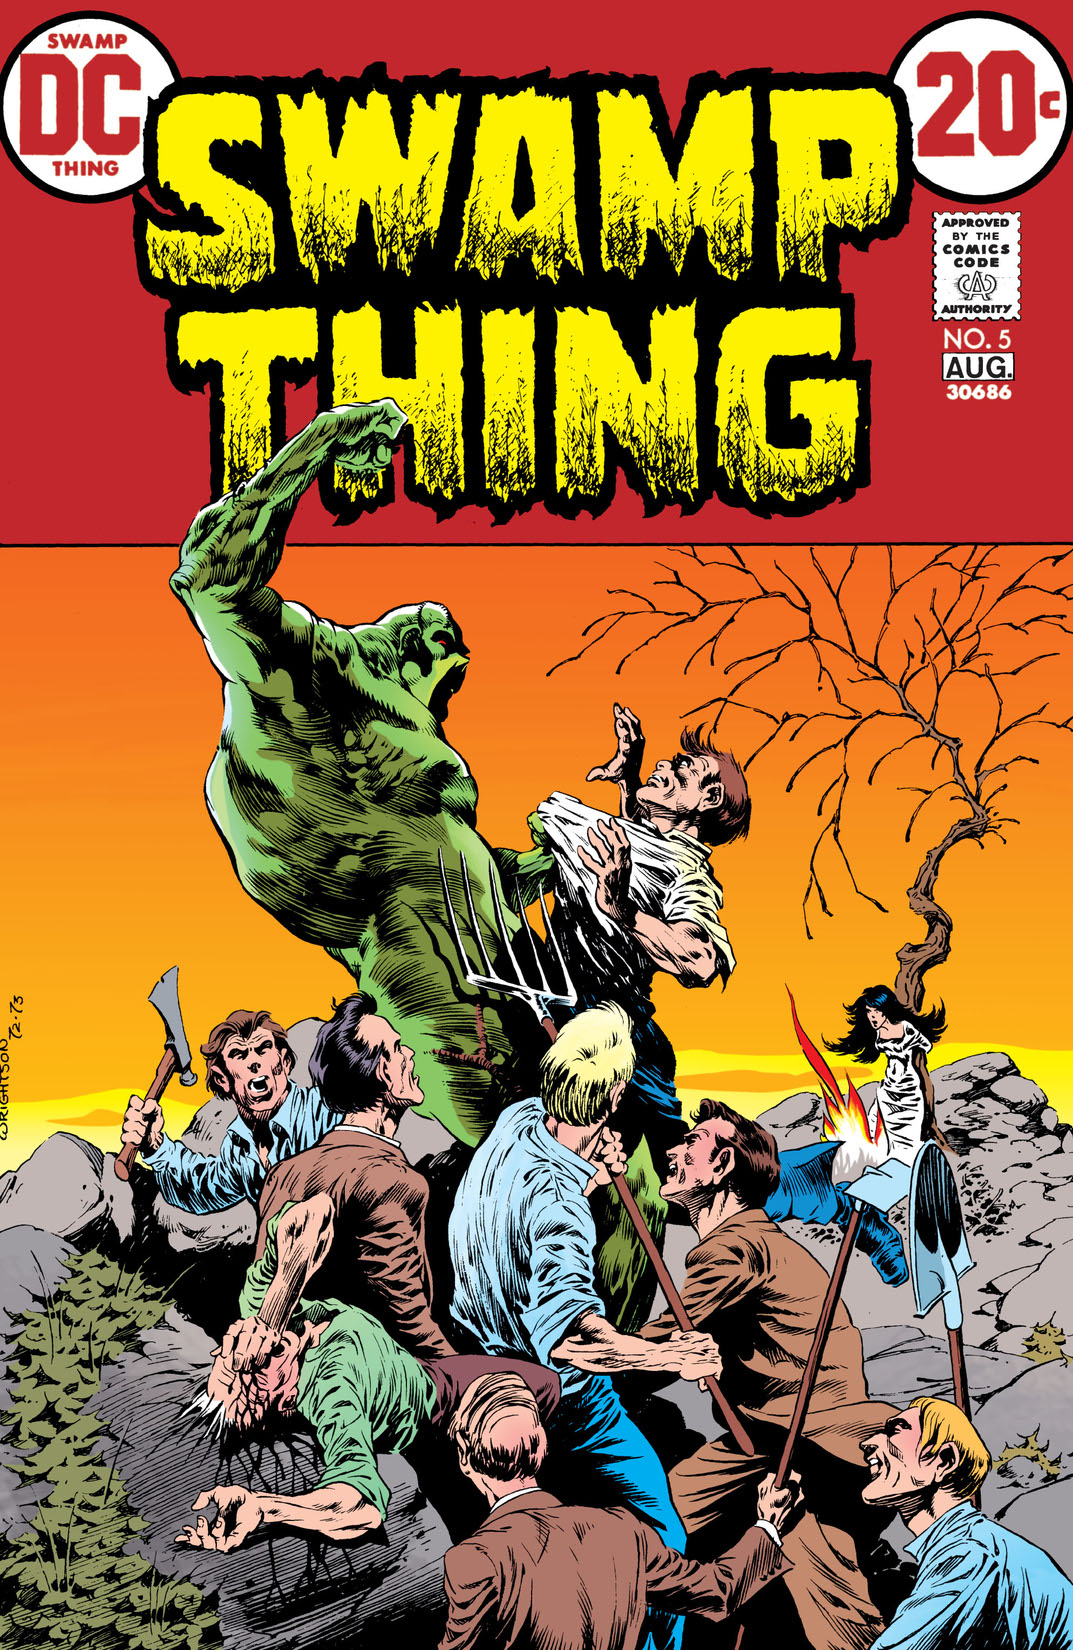 Swamp Thing (1972-) #5 preview images